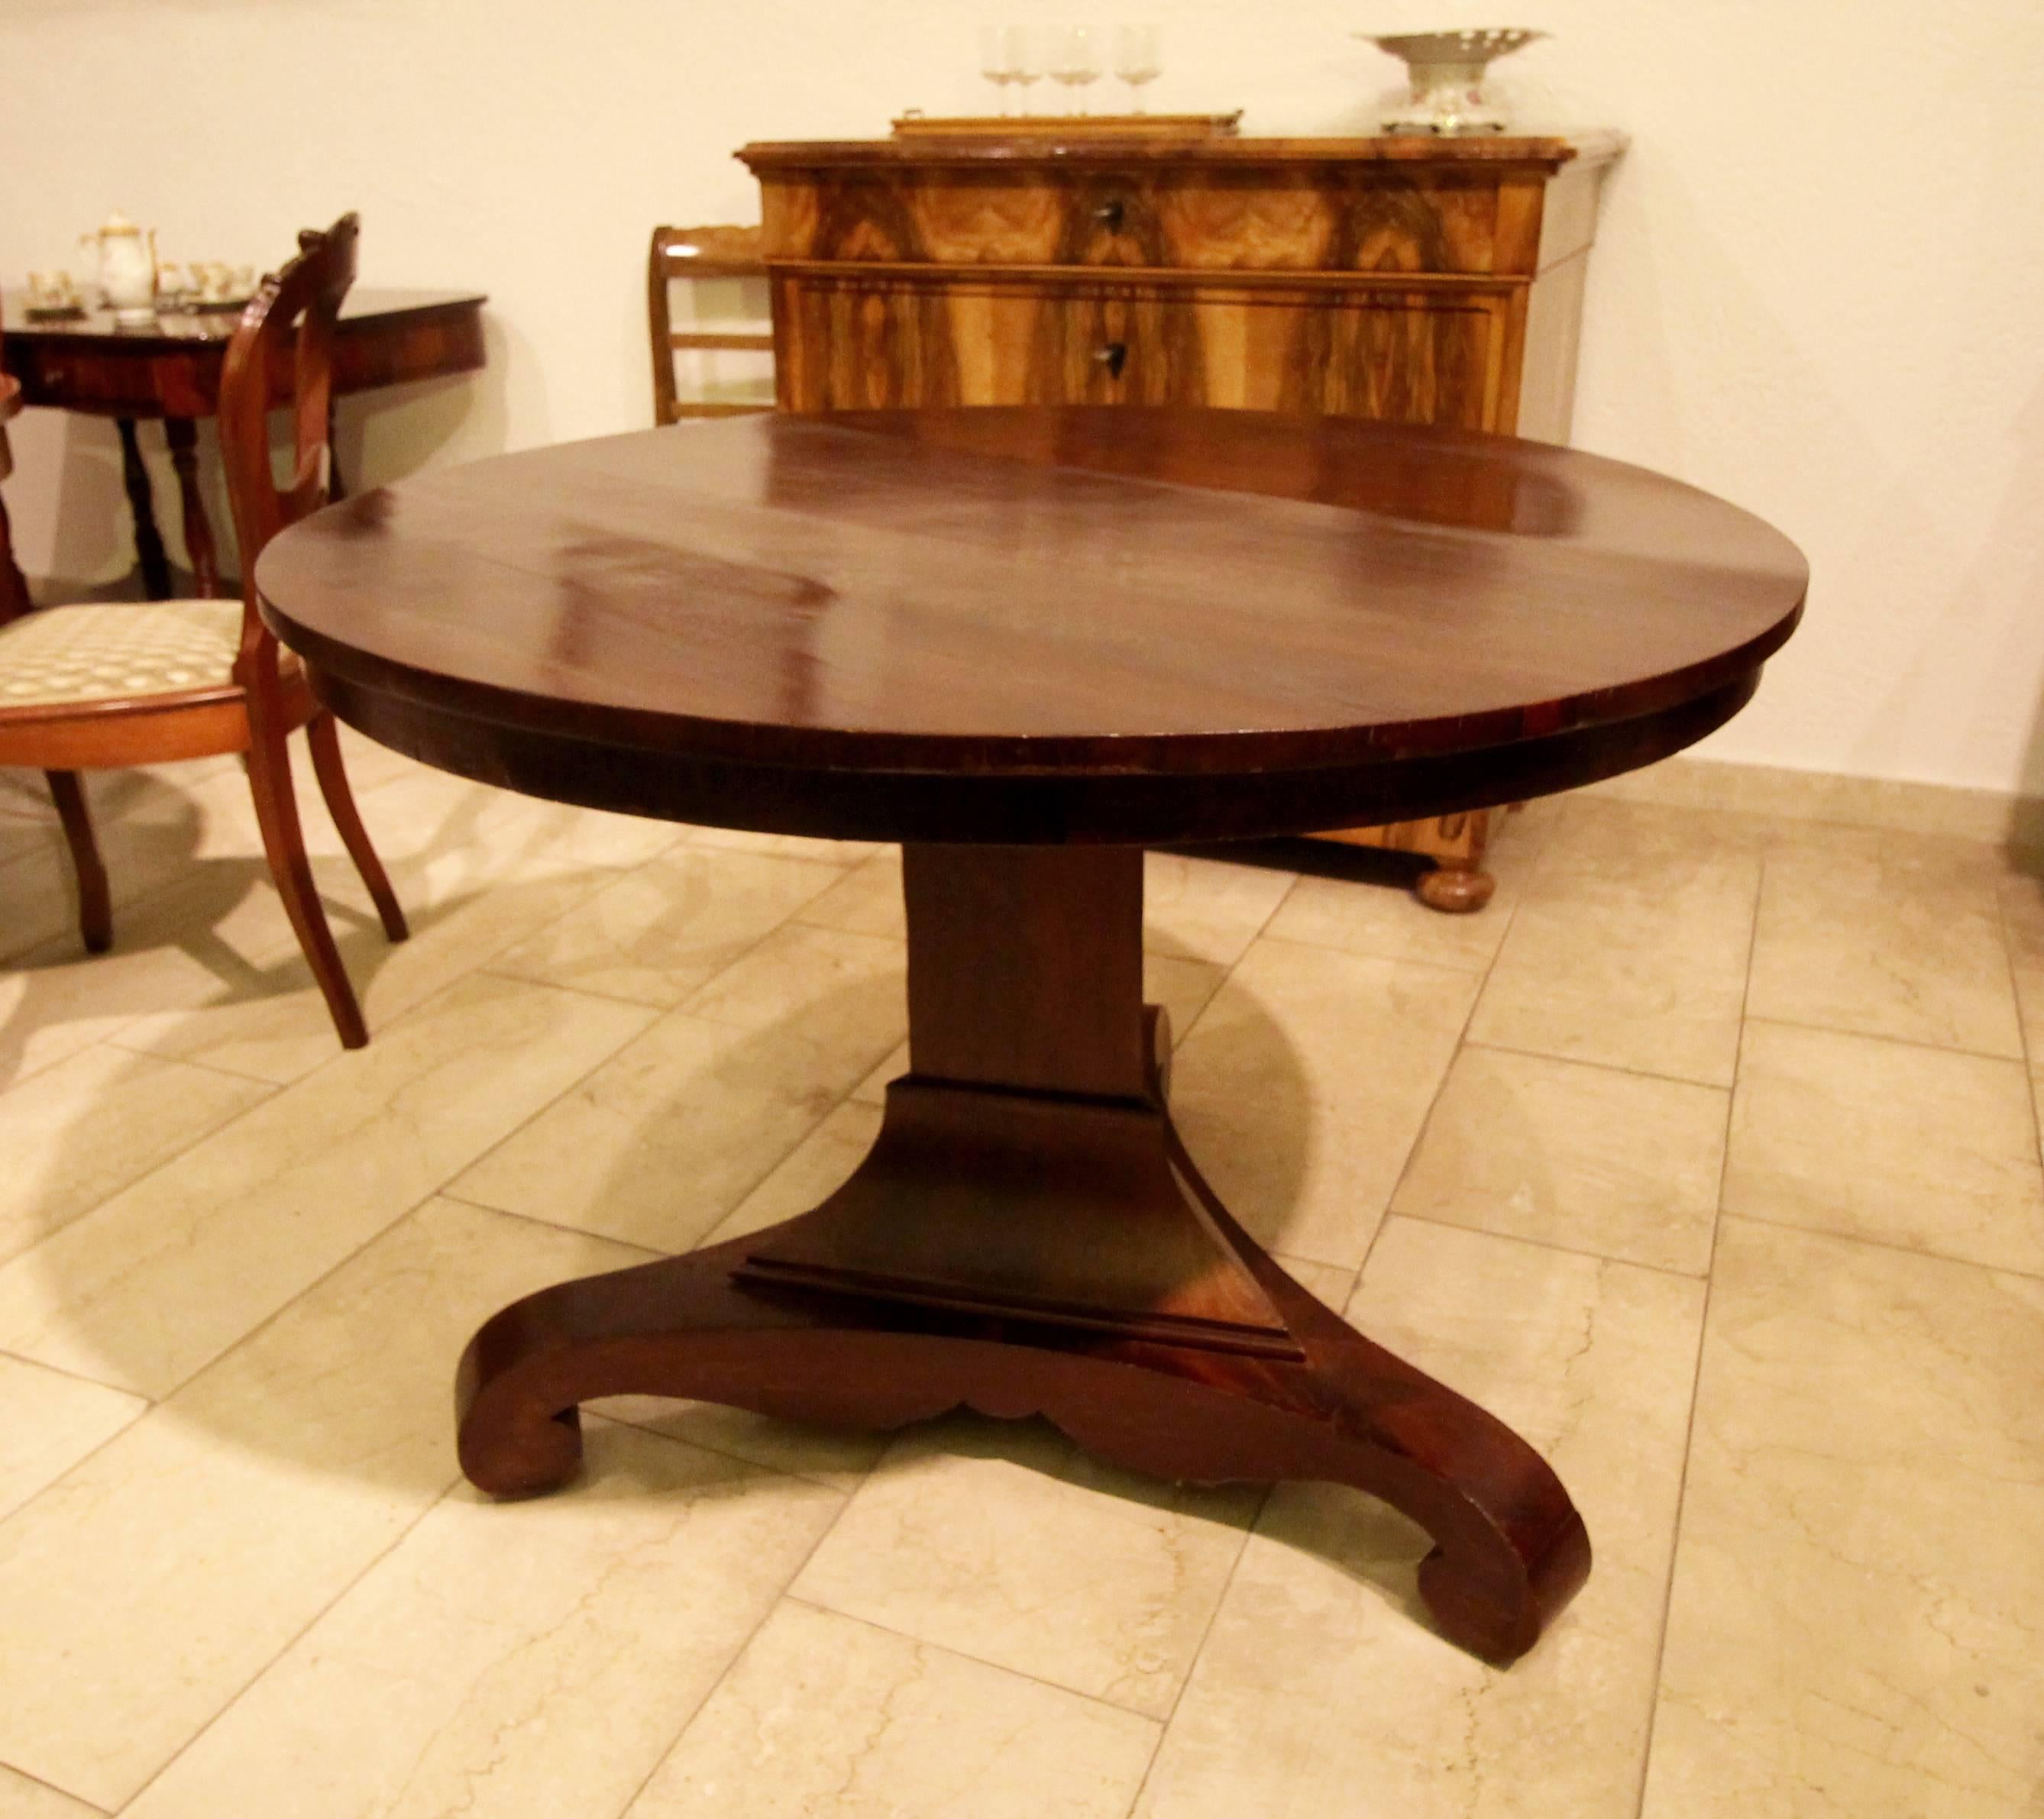 German 19th Century, Mahogany Set of Center Table and Four Chairs